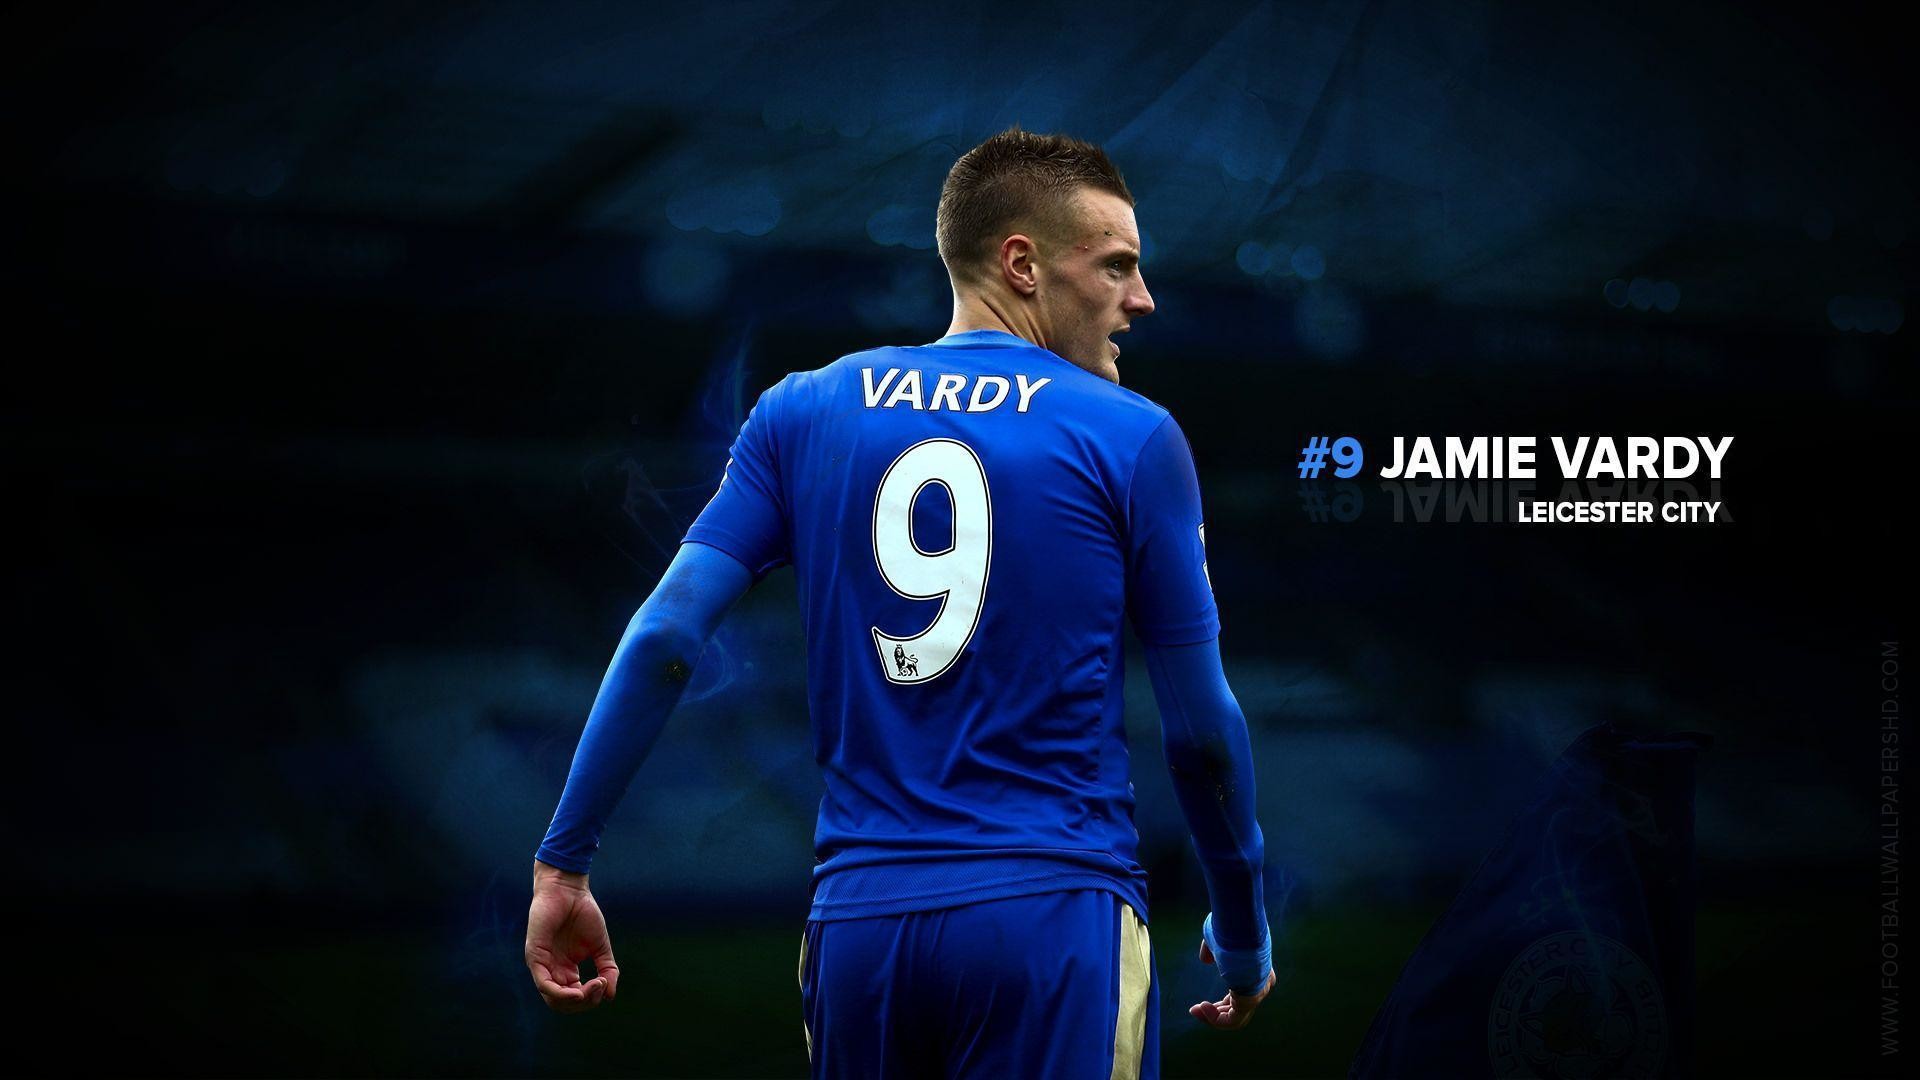 1920x1080 Jamie Vardy Leicester City Wallpaper | Football Wallpapers HD .